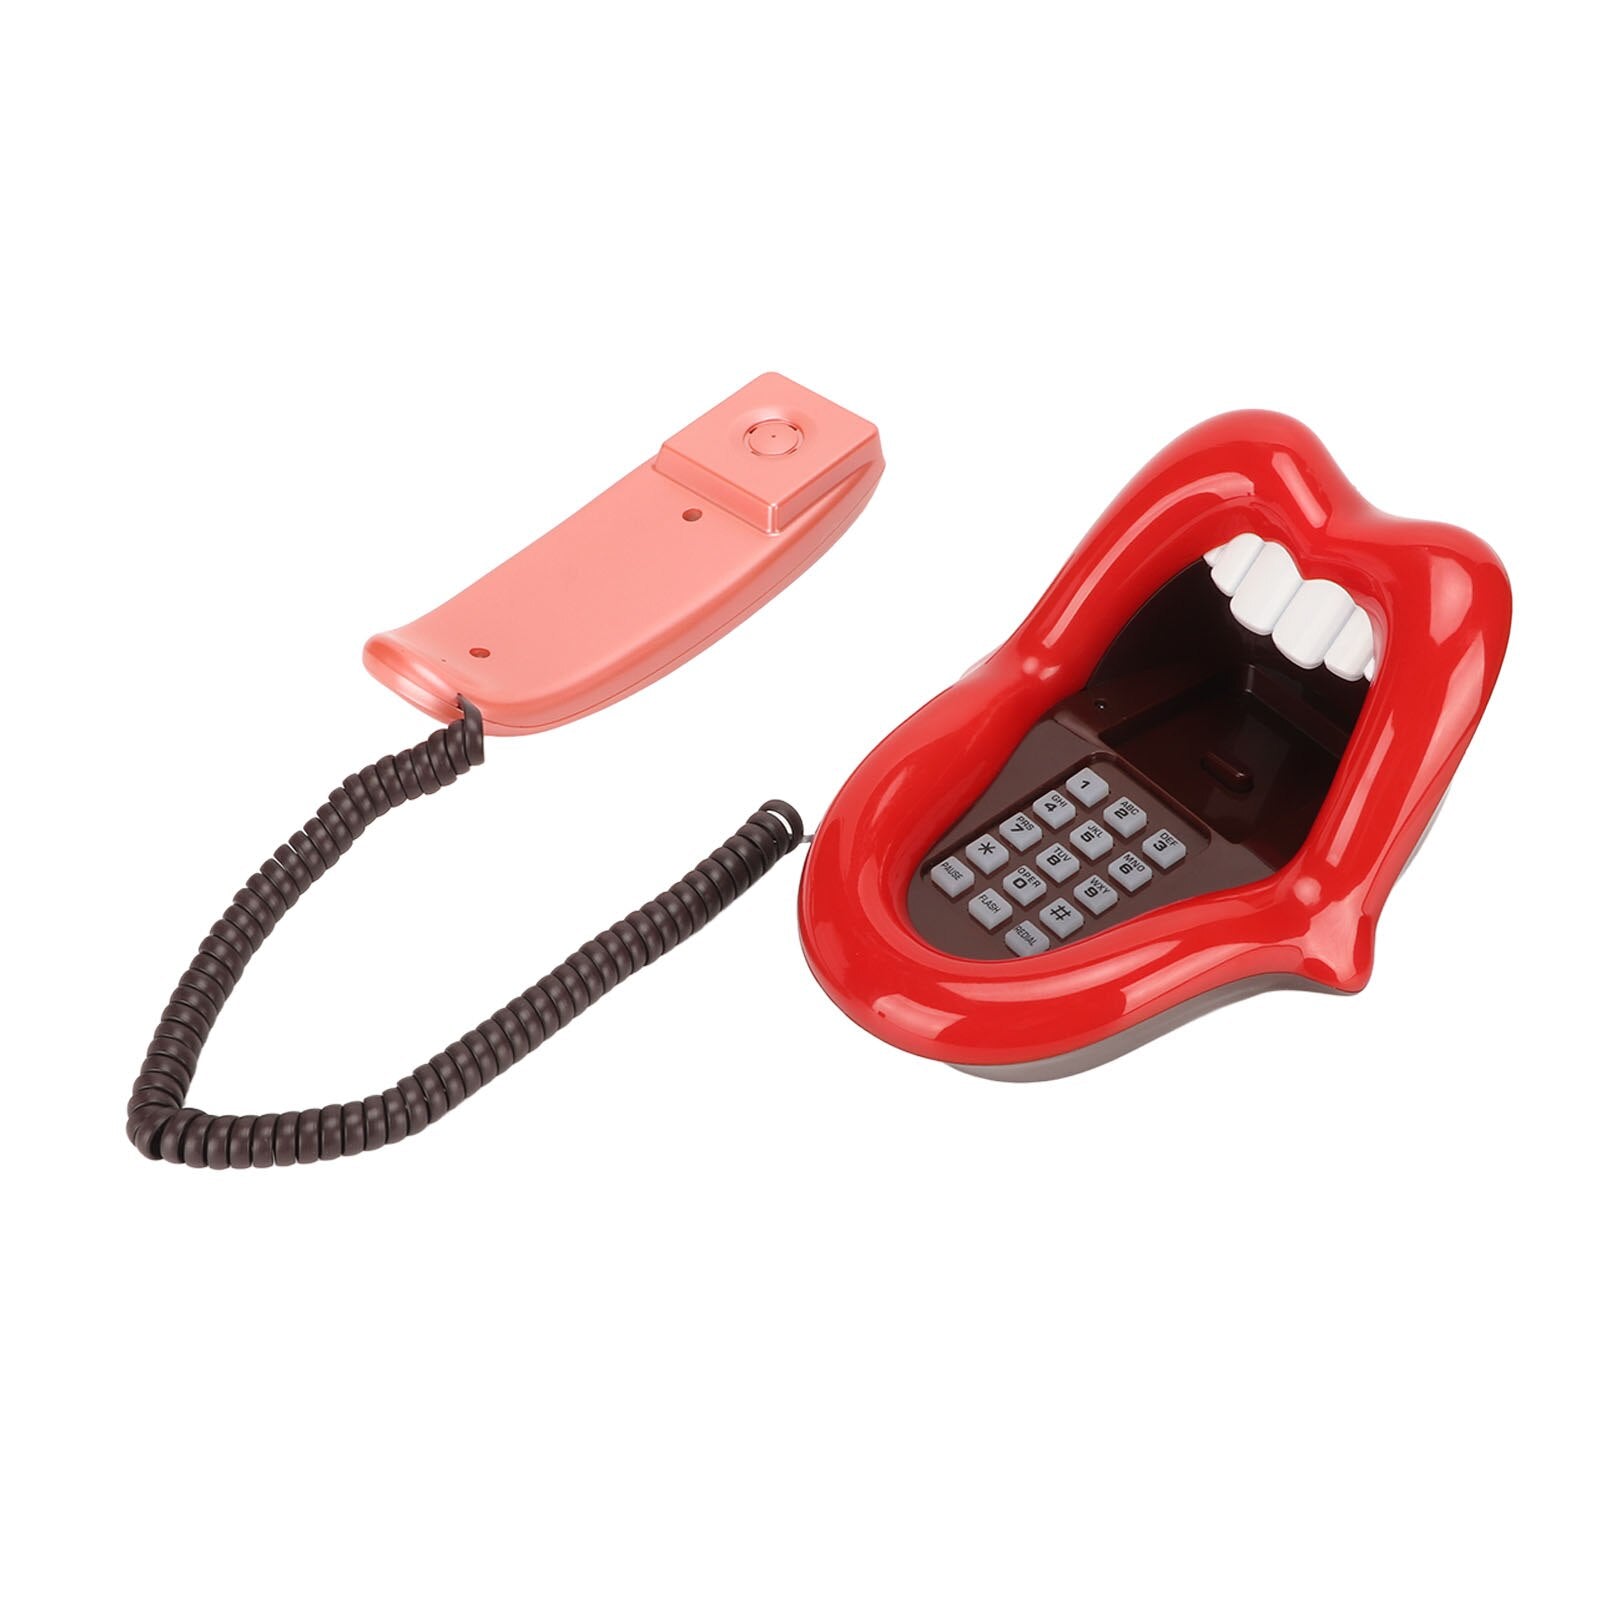 Novelty Tongue Stretching Sexy Lips Mouth Corded Phone with LED Indicator, Mini Landline Telephone for Home and Office Decor